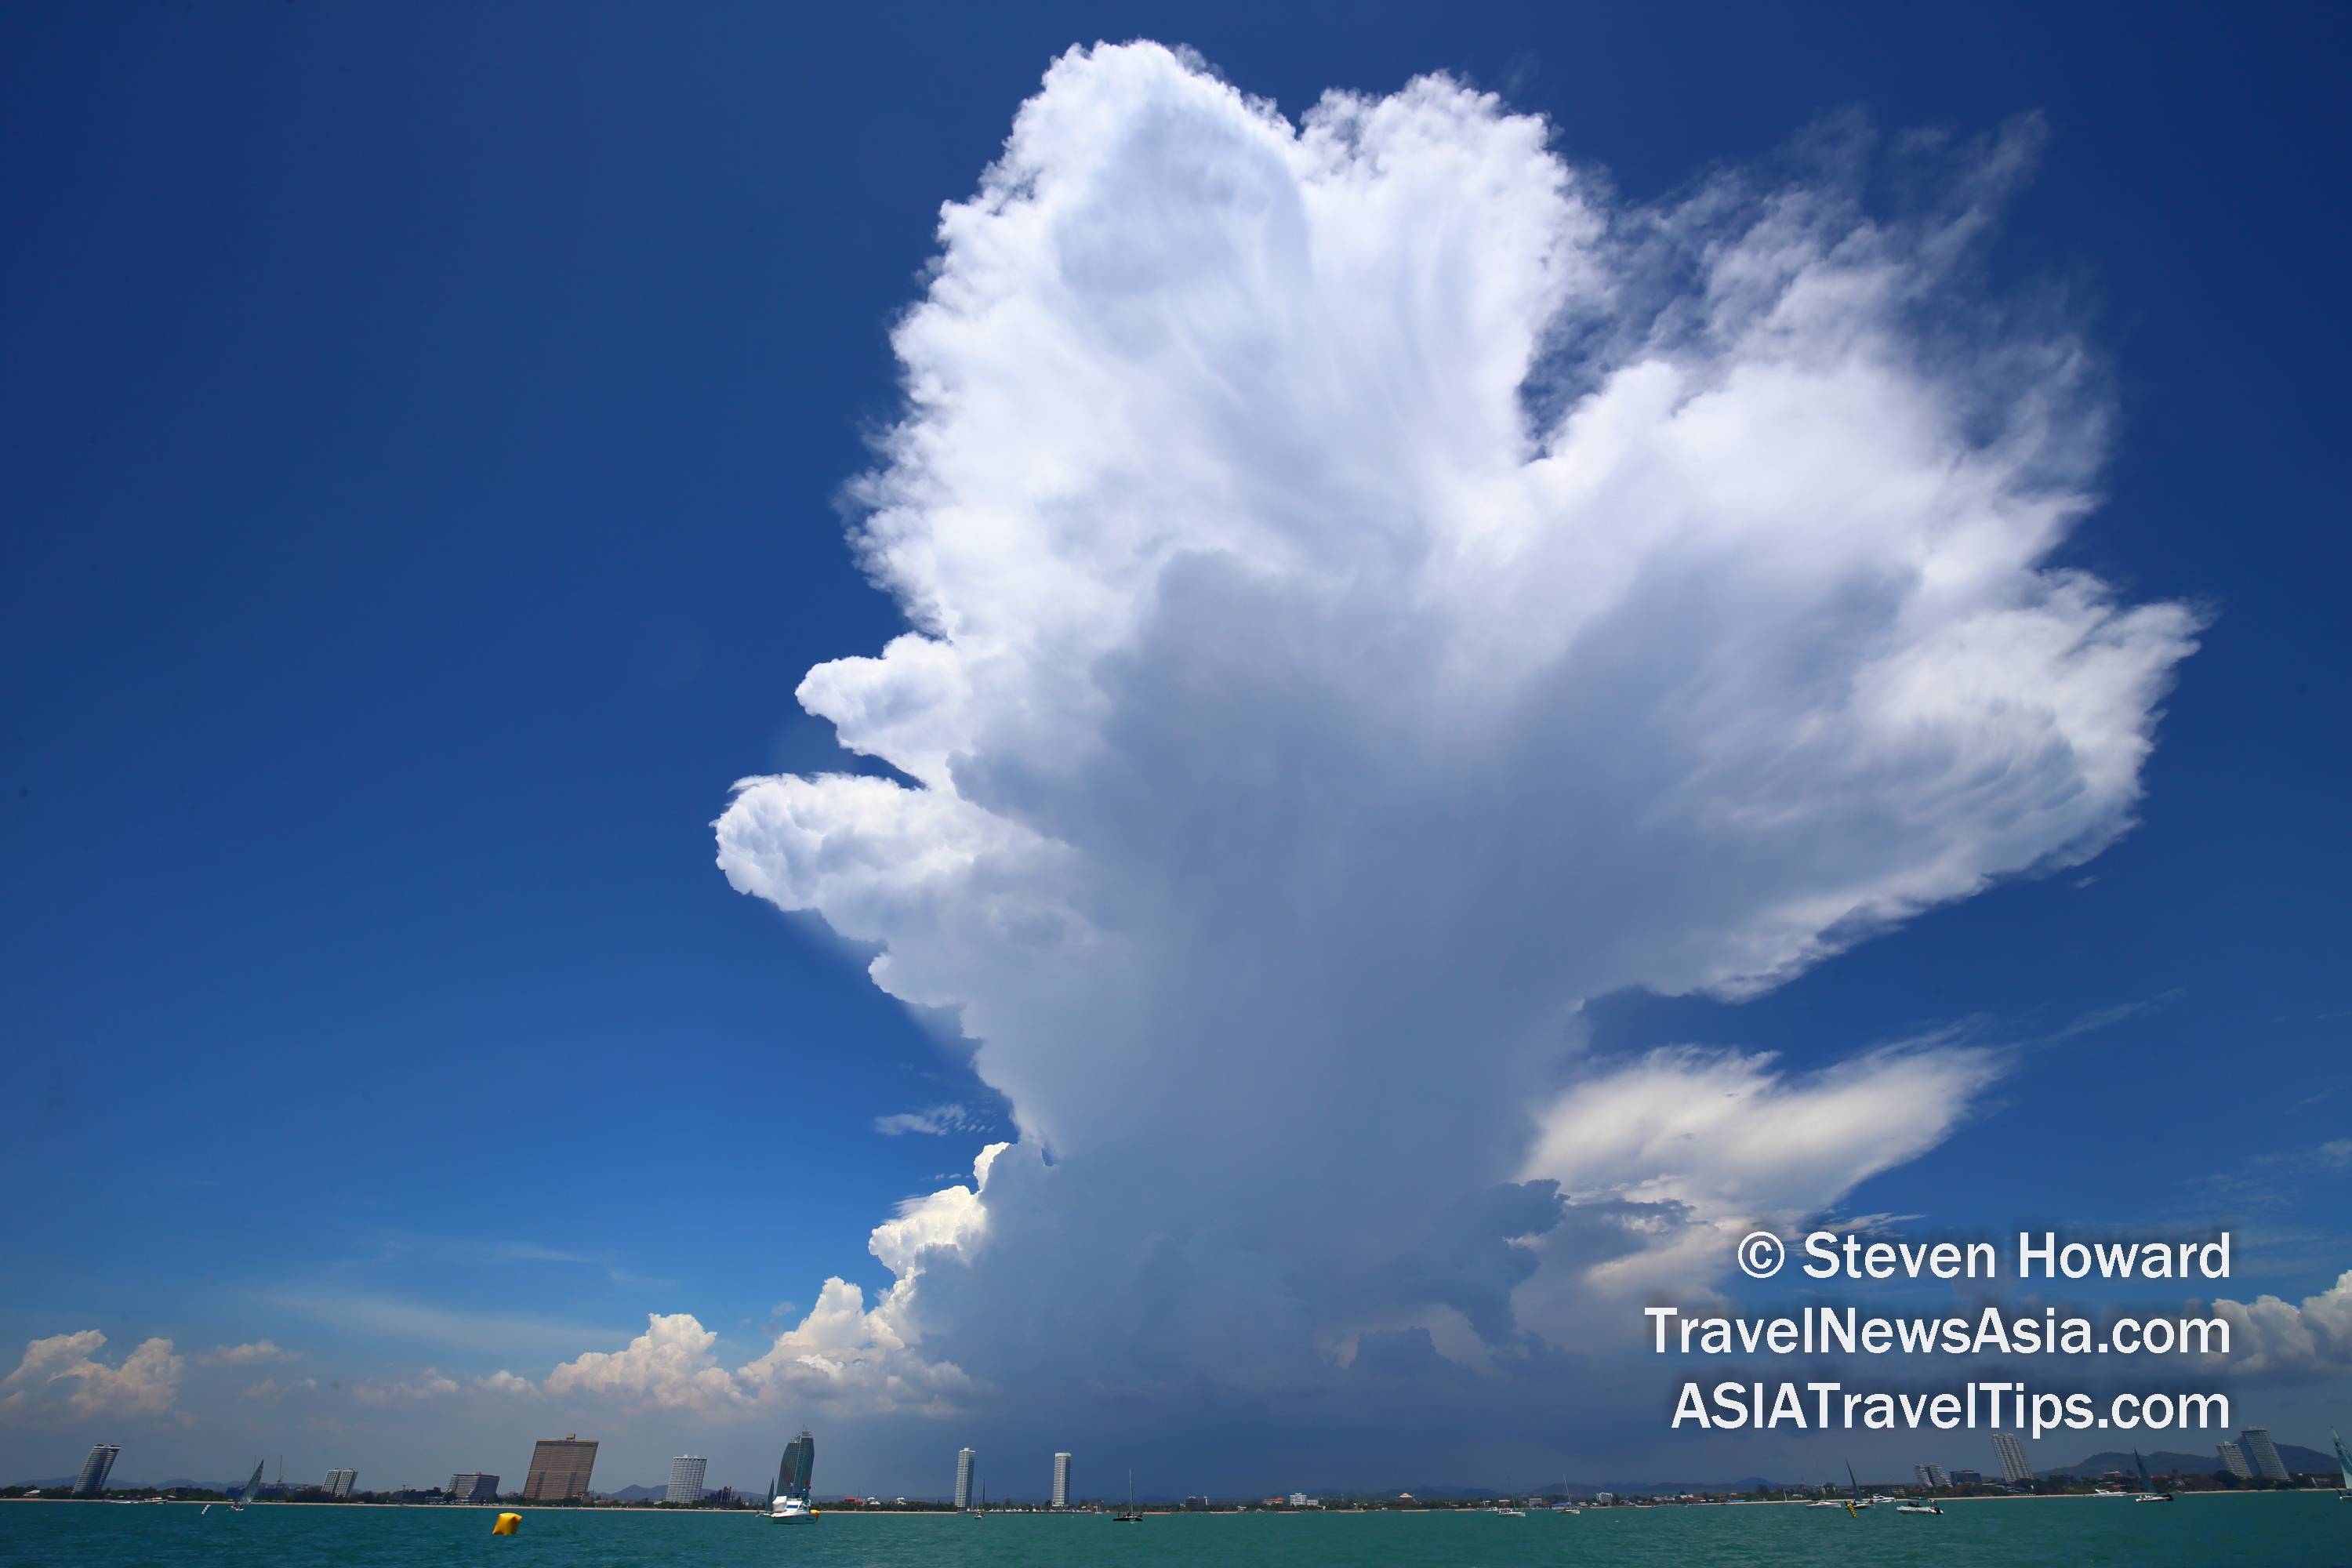 The IATA Turbulence Aware platform enables pilots and dispatchers to choose optimal flight paths, avoiding turbulence and flying at optimum levels to maximize fuel efficiency and thereby reduce CO2 emissions. Picture by Steven Howard of TravelNewsAsia.com of clouds rolling over Pattaya, Thailand. Click to enlarge.